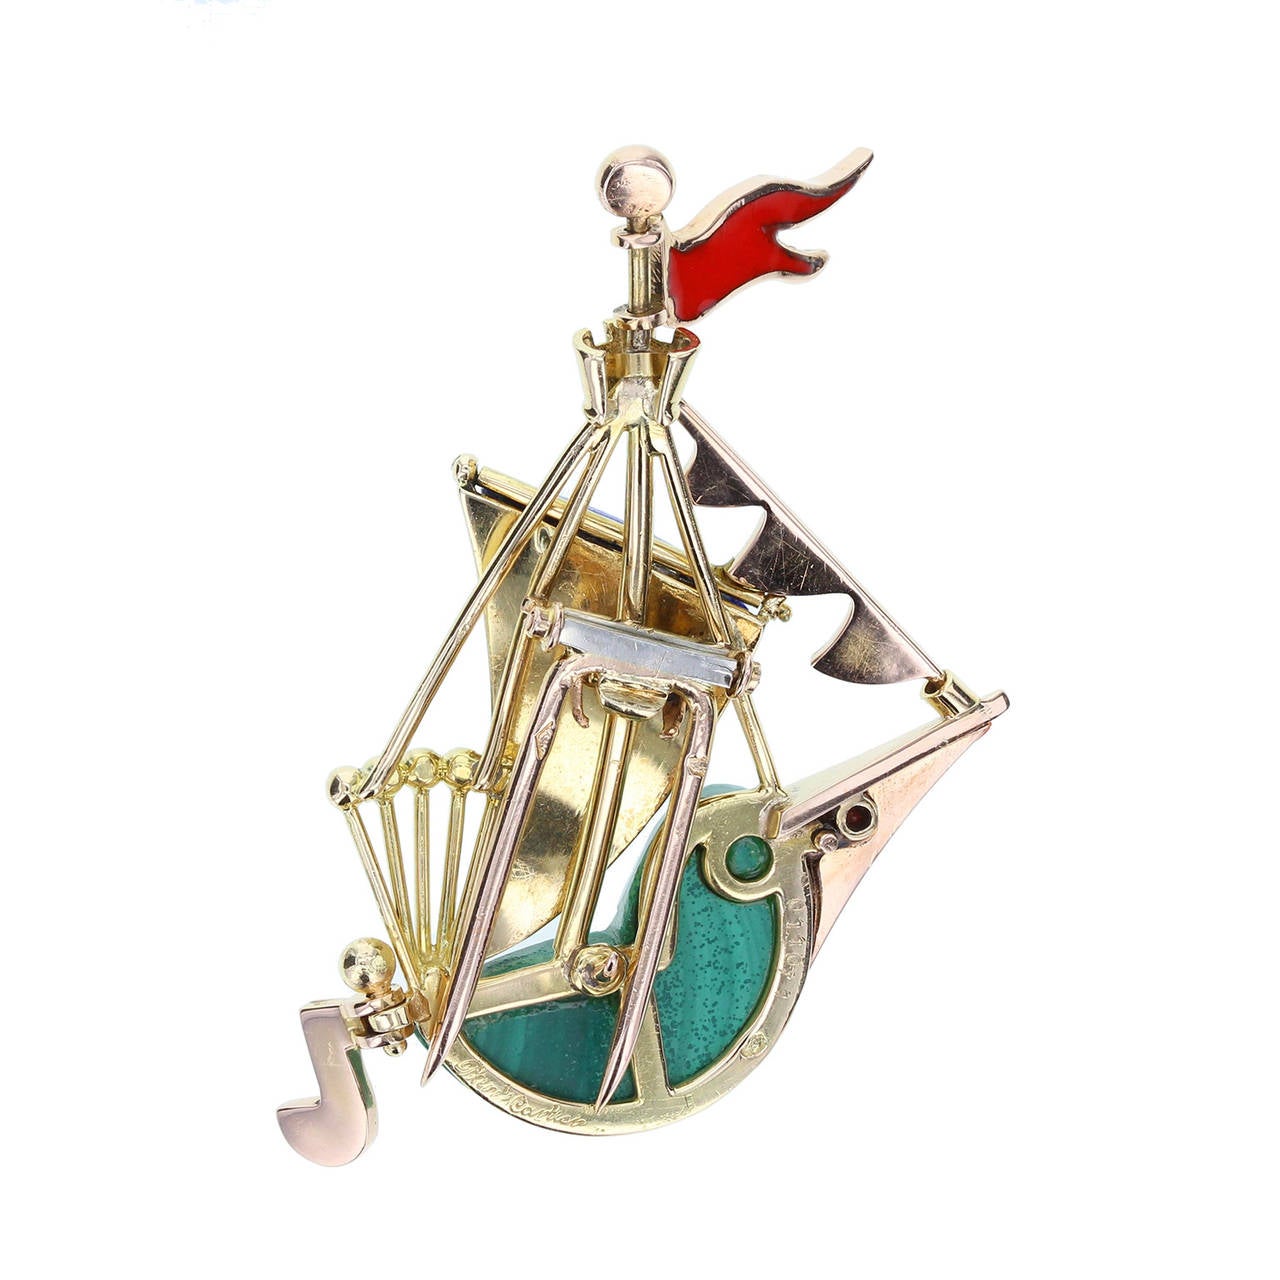 A whimsical and fun brooch by Cartier in the form of a sailing ship. Fashioned from 18 carat yellow gold and featuring geometric shapes of malachite, lapis lazuli, coral and enamel. Signed Cartier Paris, French hallmark.